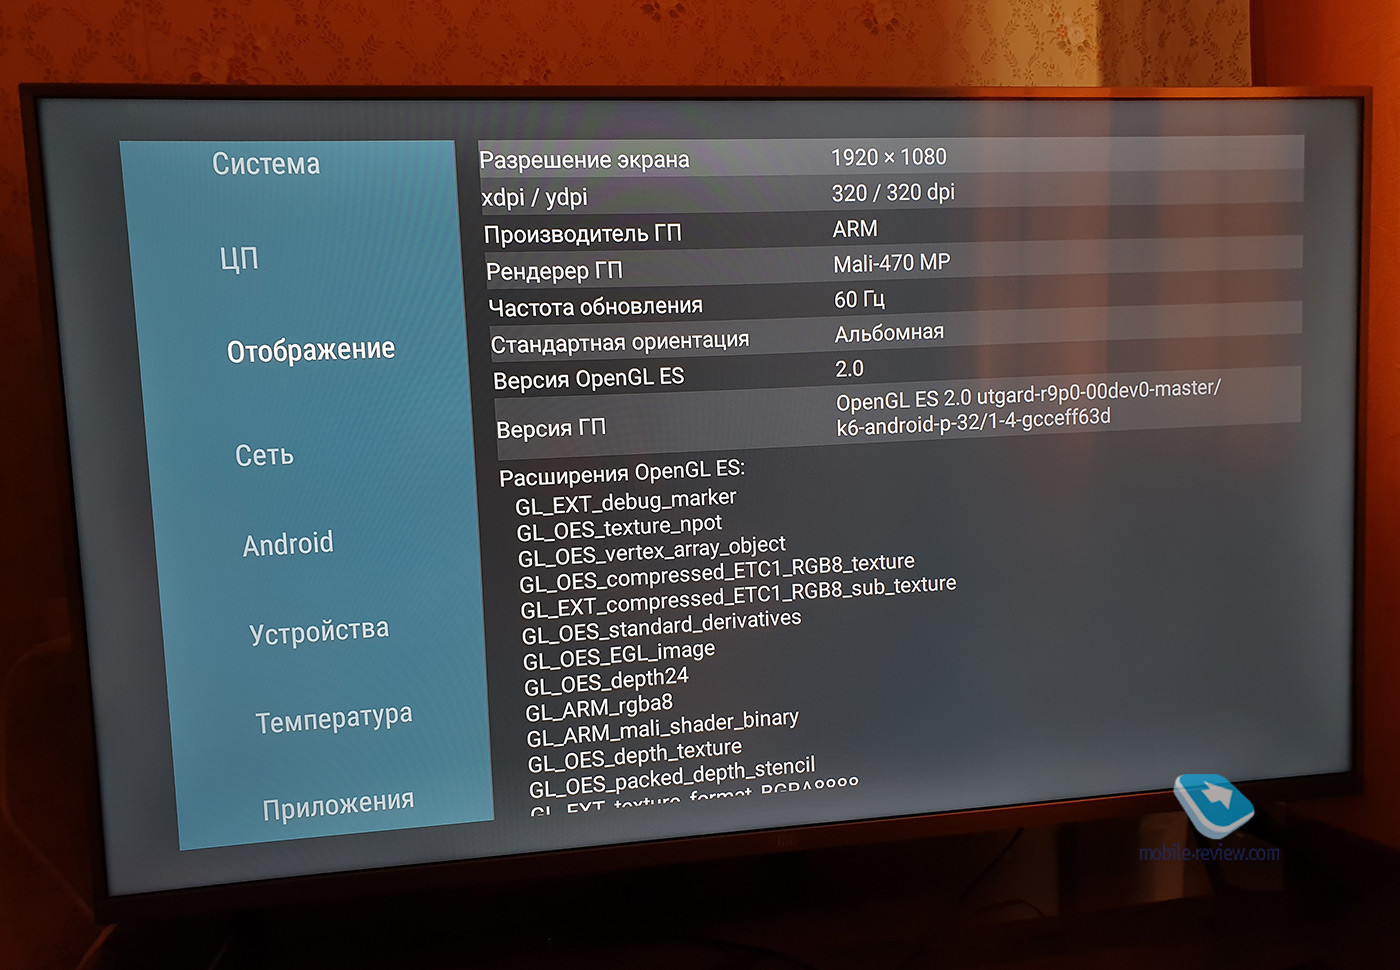 Why Xiaomi TVs 2020 are good: important details about the 4-inch Mi TV 50S